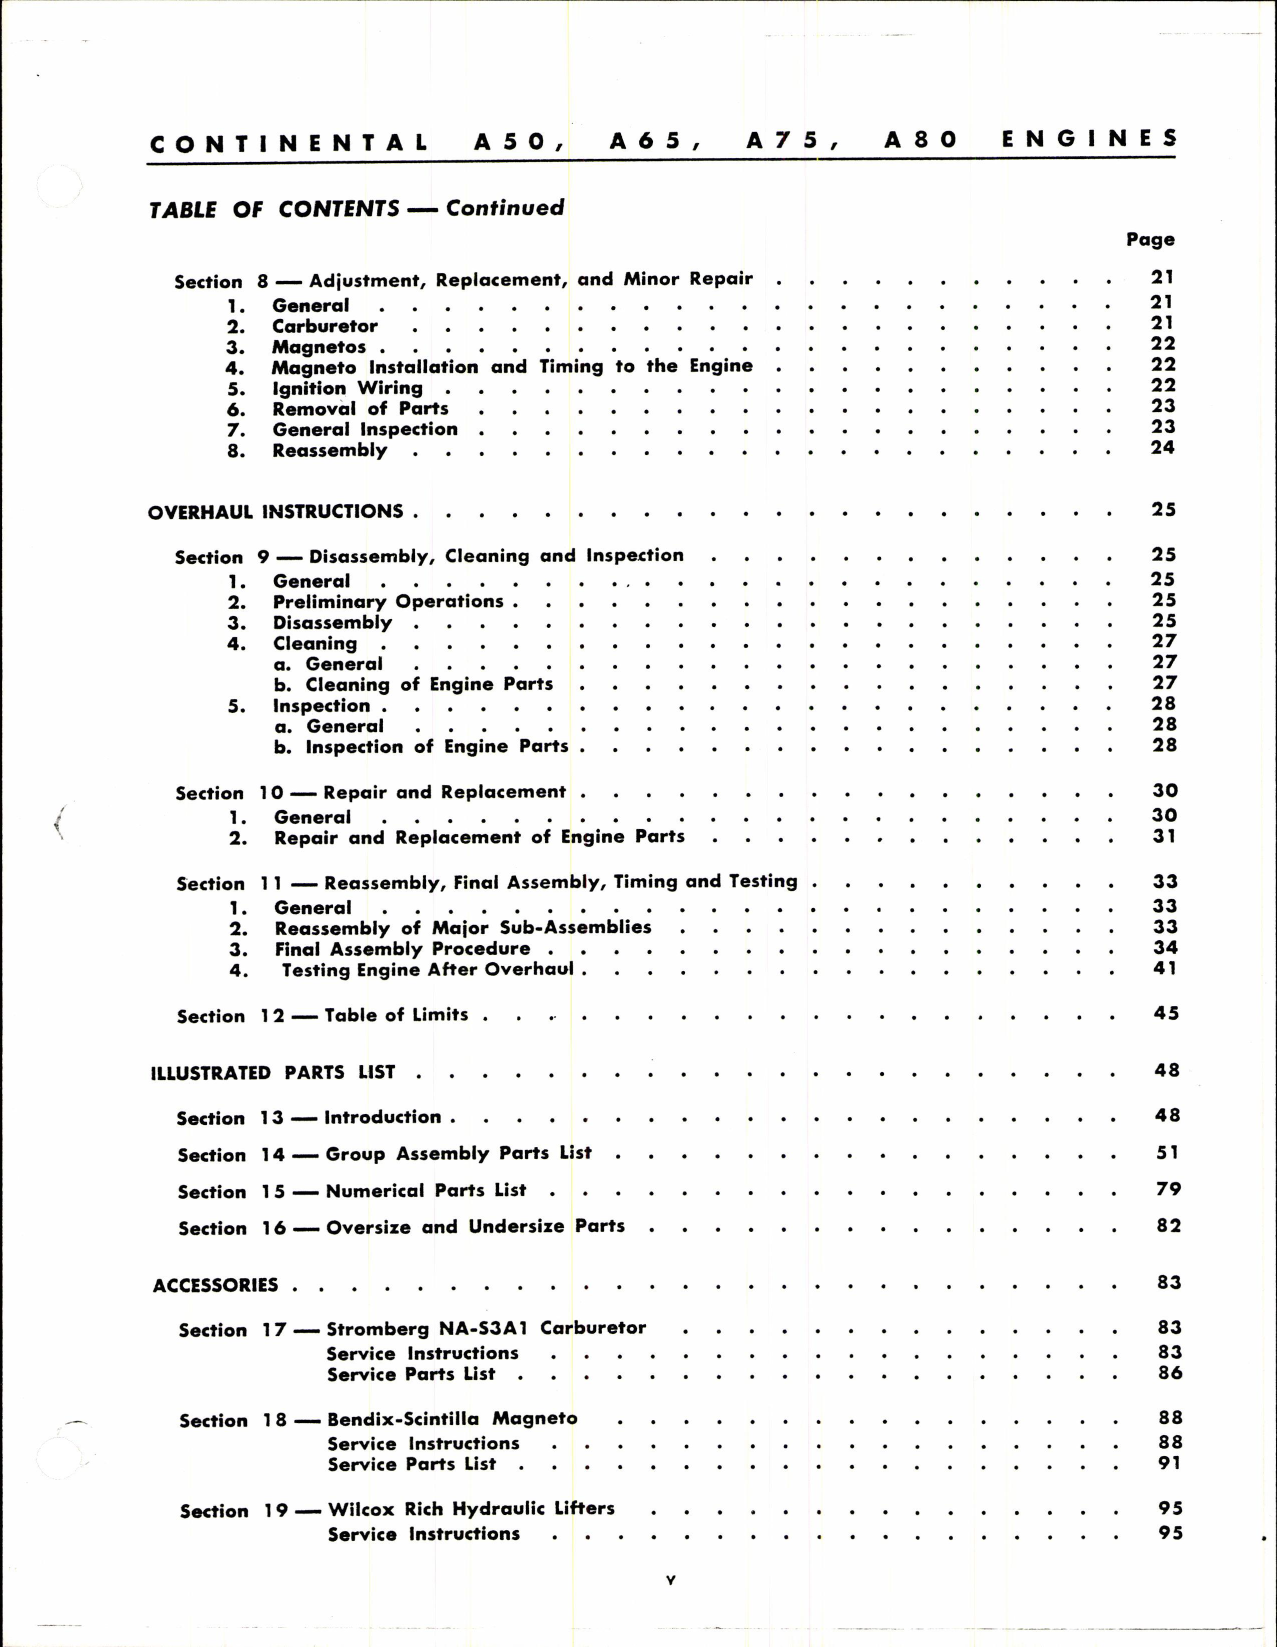 Sample page 4 from AirCorps Library document: Maintenance & Overhaul Manual for Continental Models A50